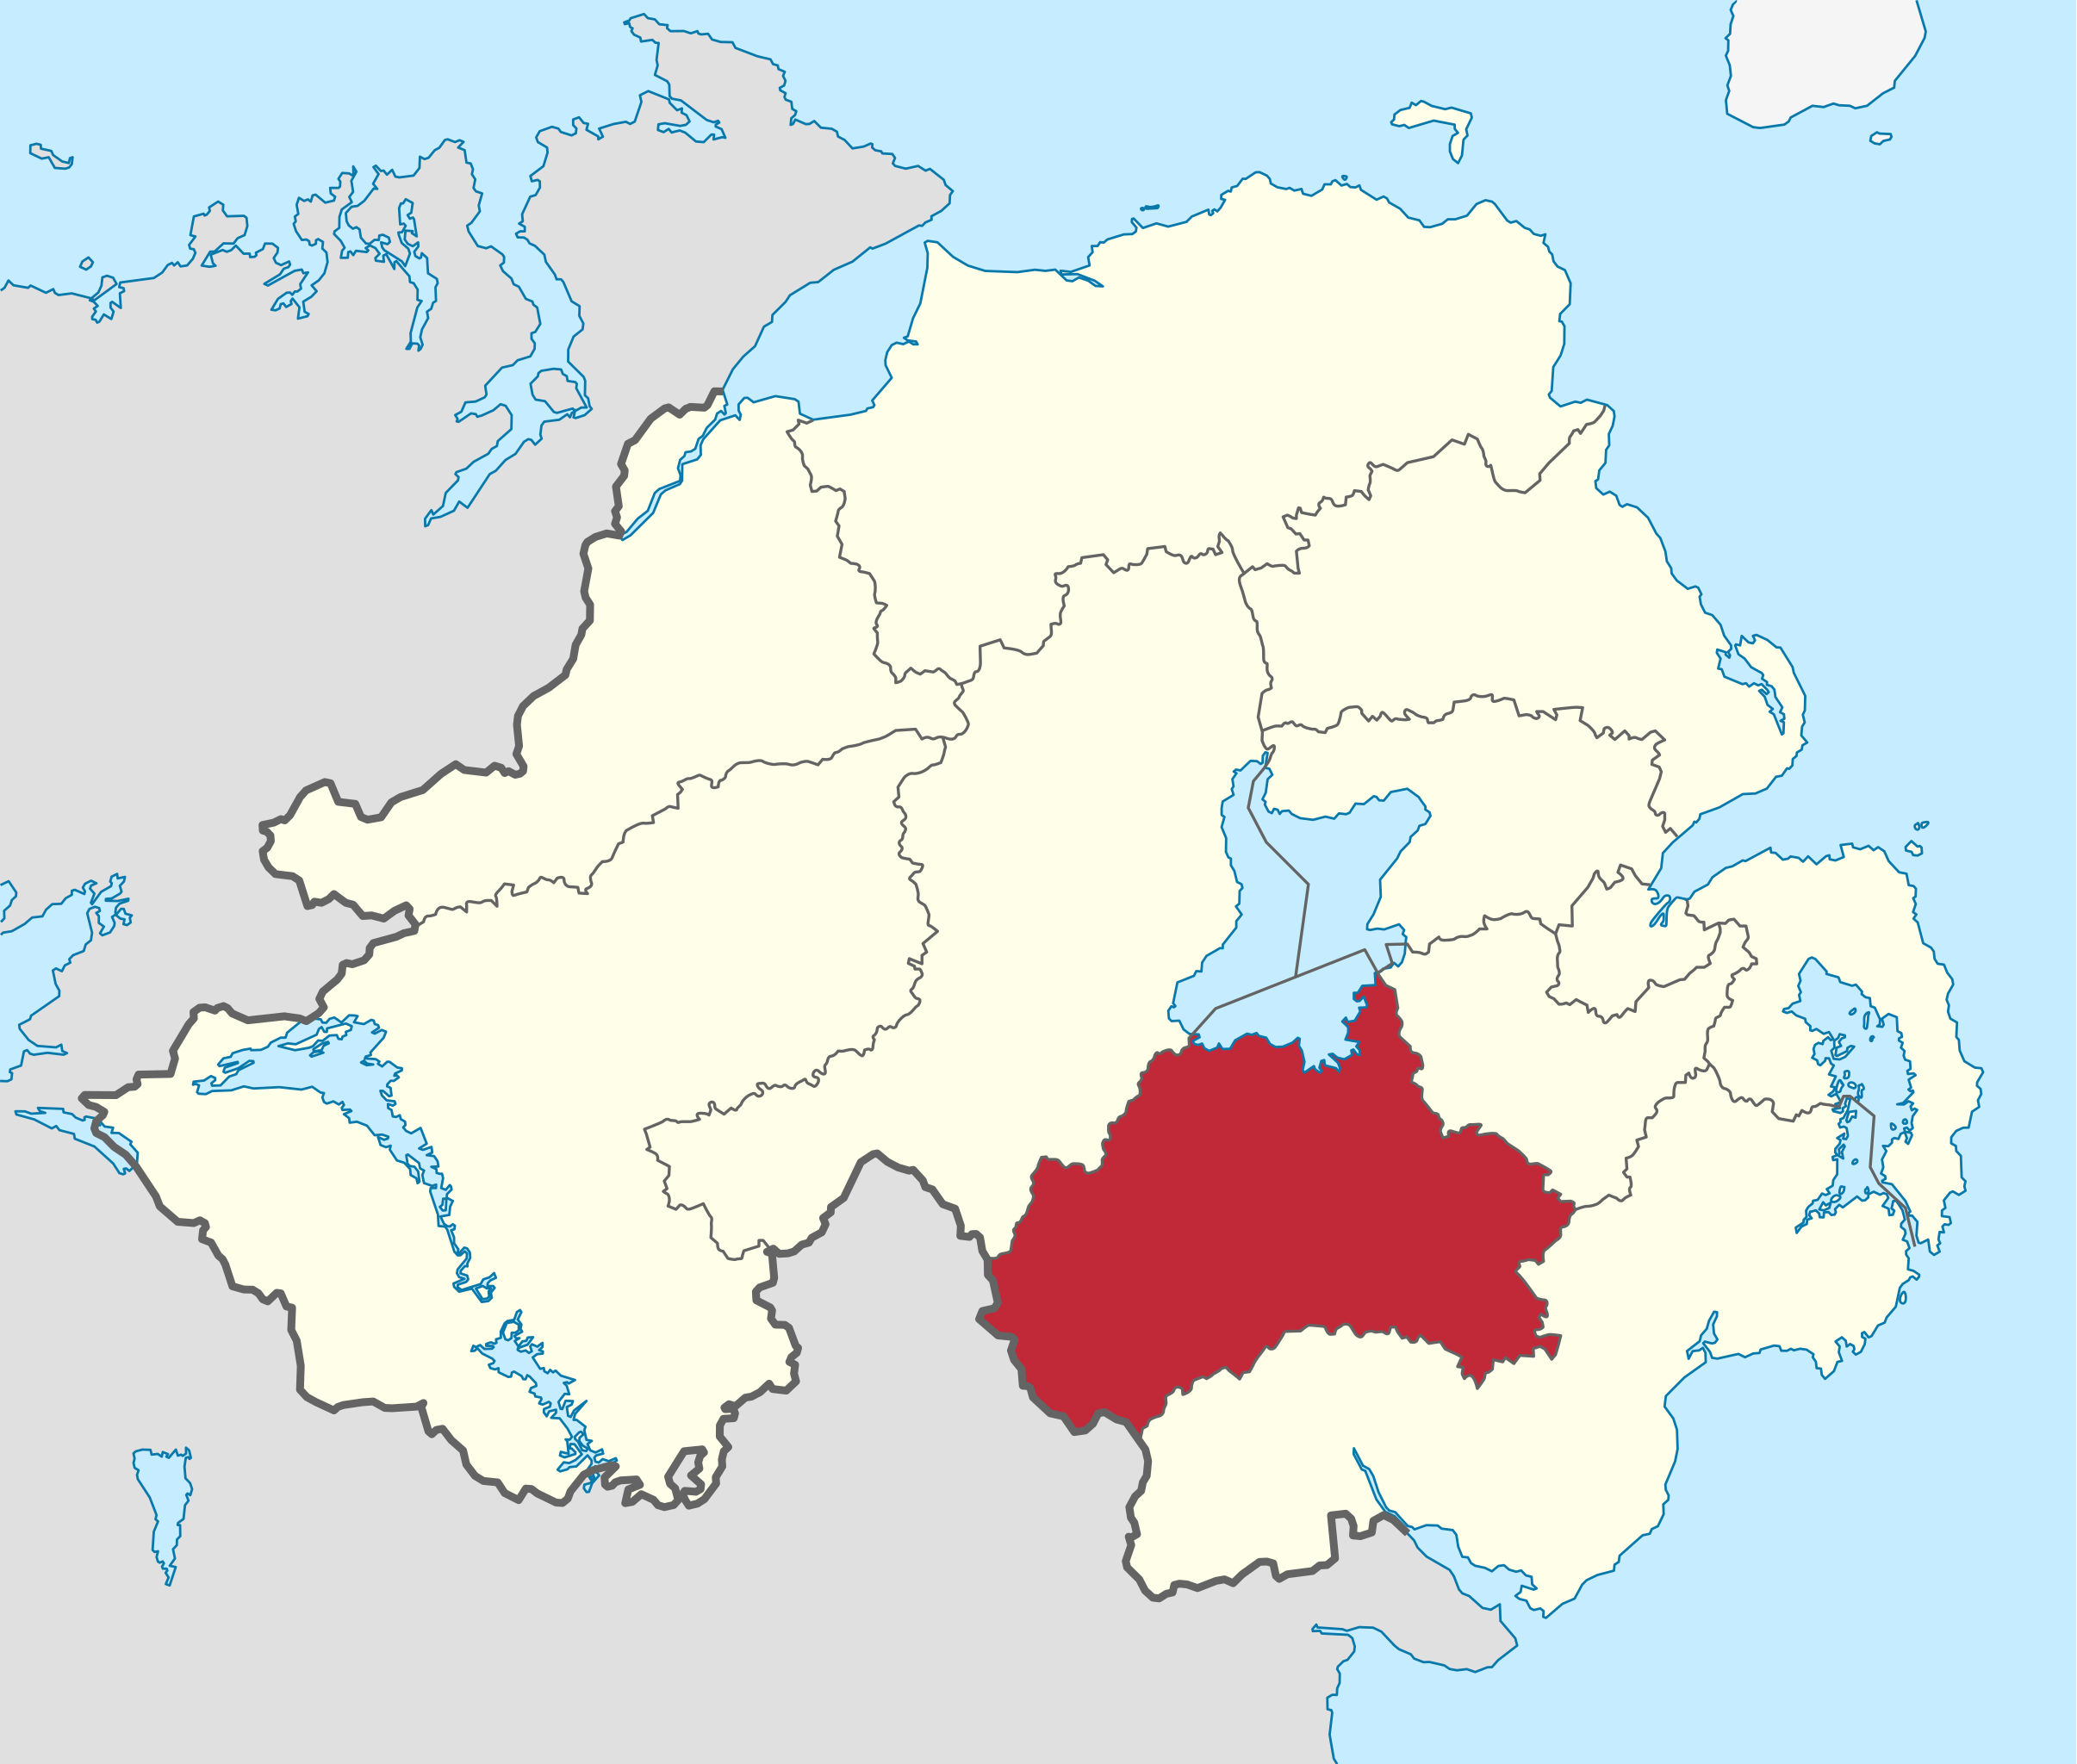 File:Armagh, Banbridge and Craigavon district in Northern Ireland